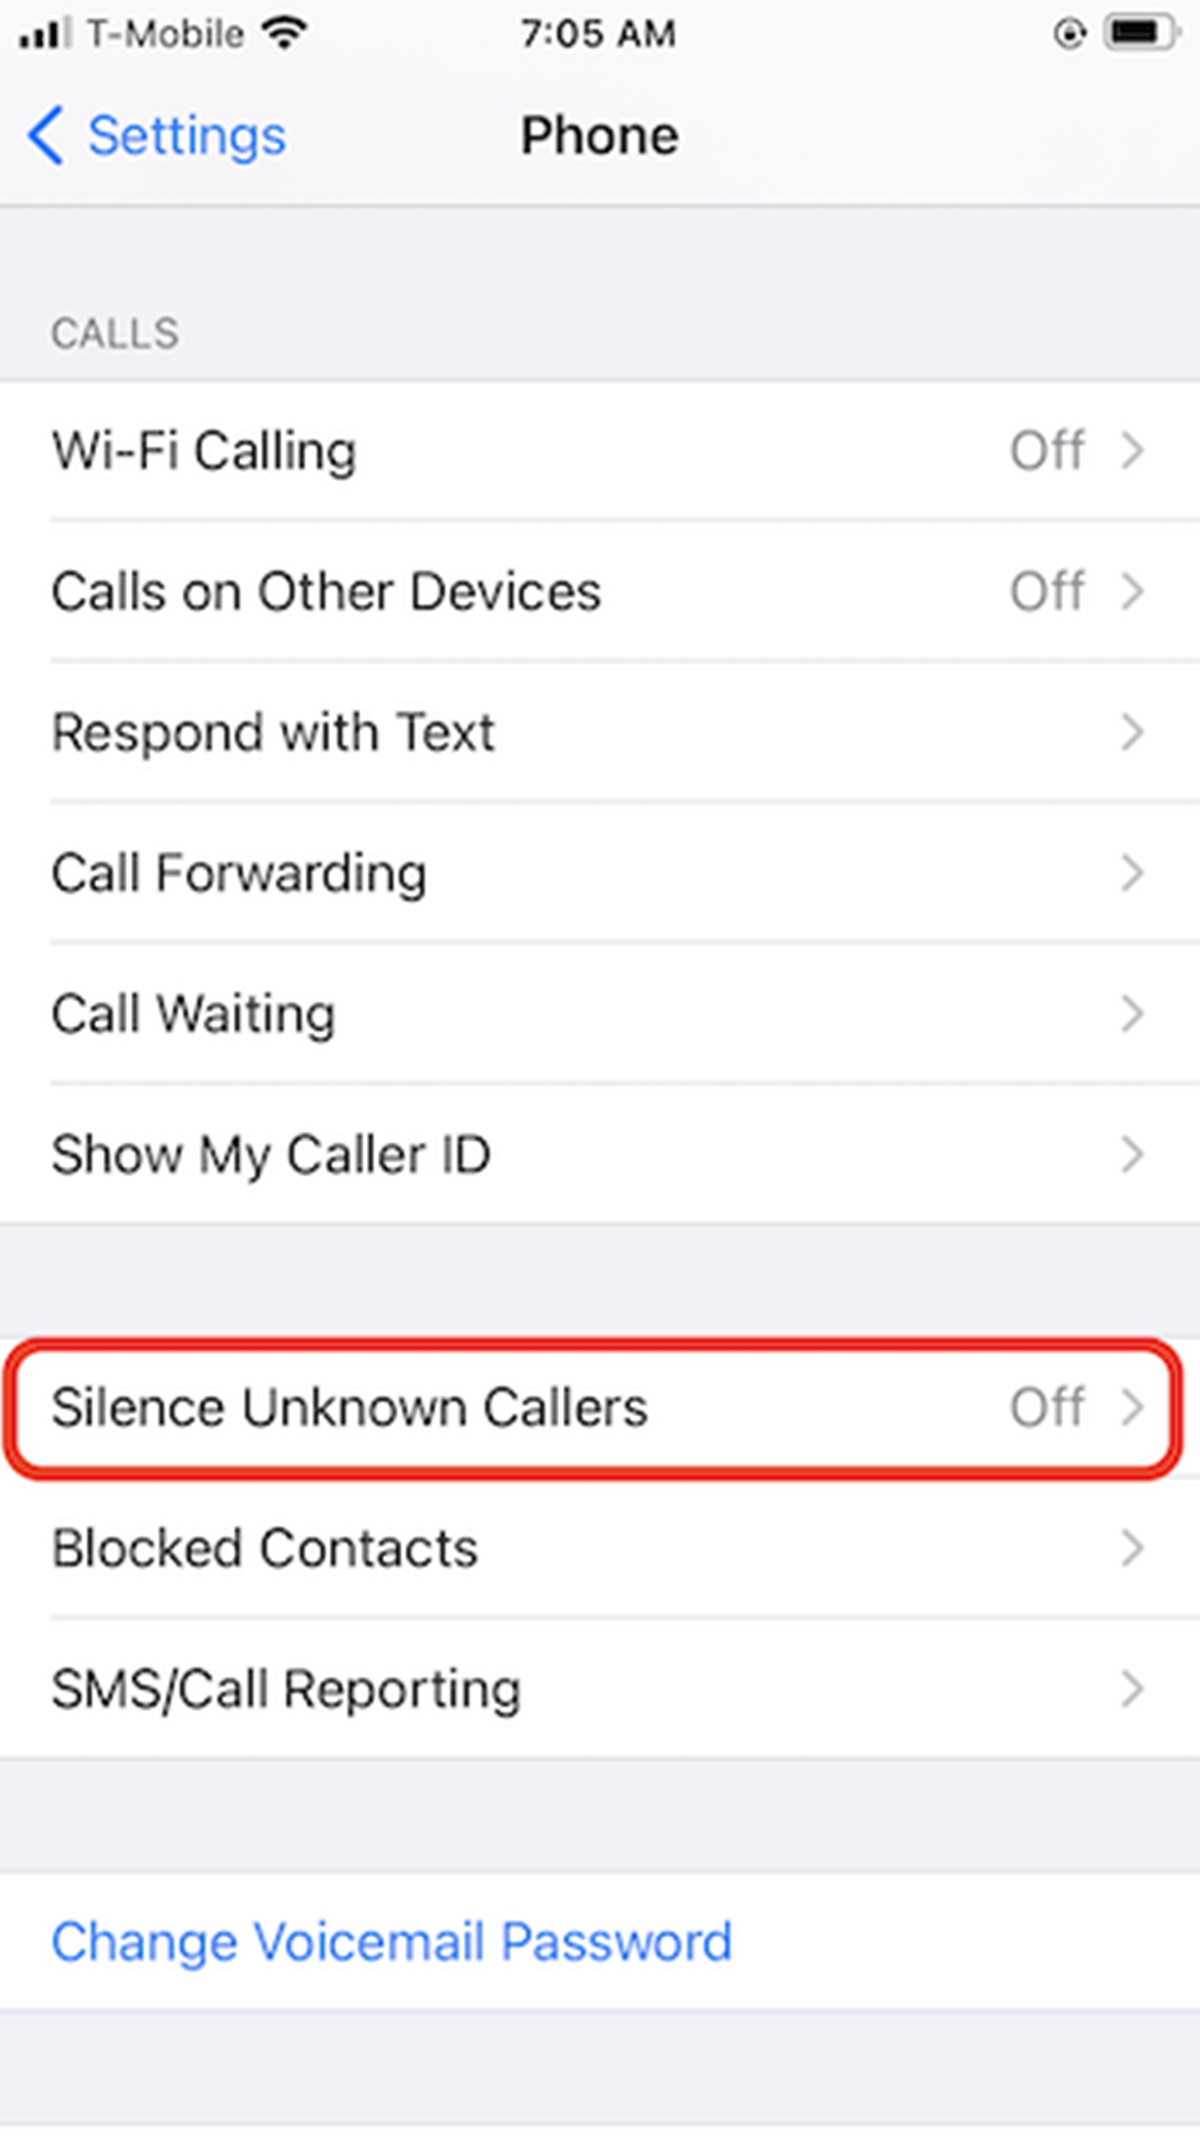 How To Block ‘Scam Likely’ Calls On iPhone